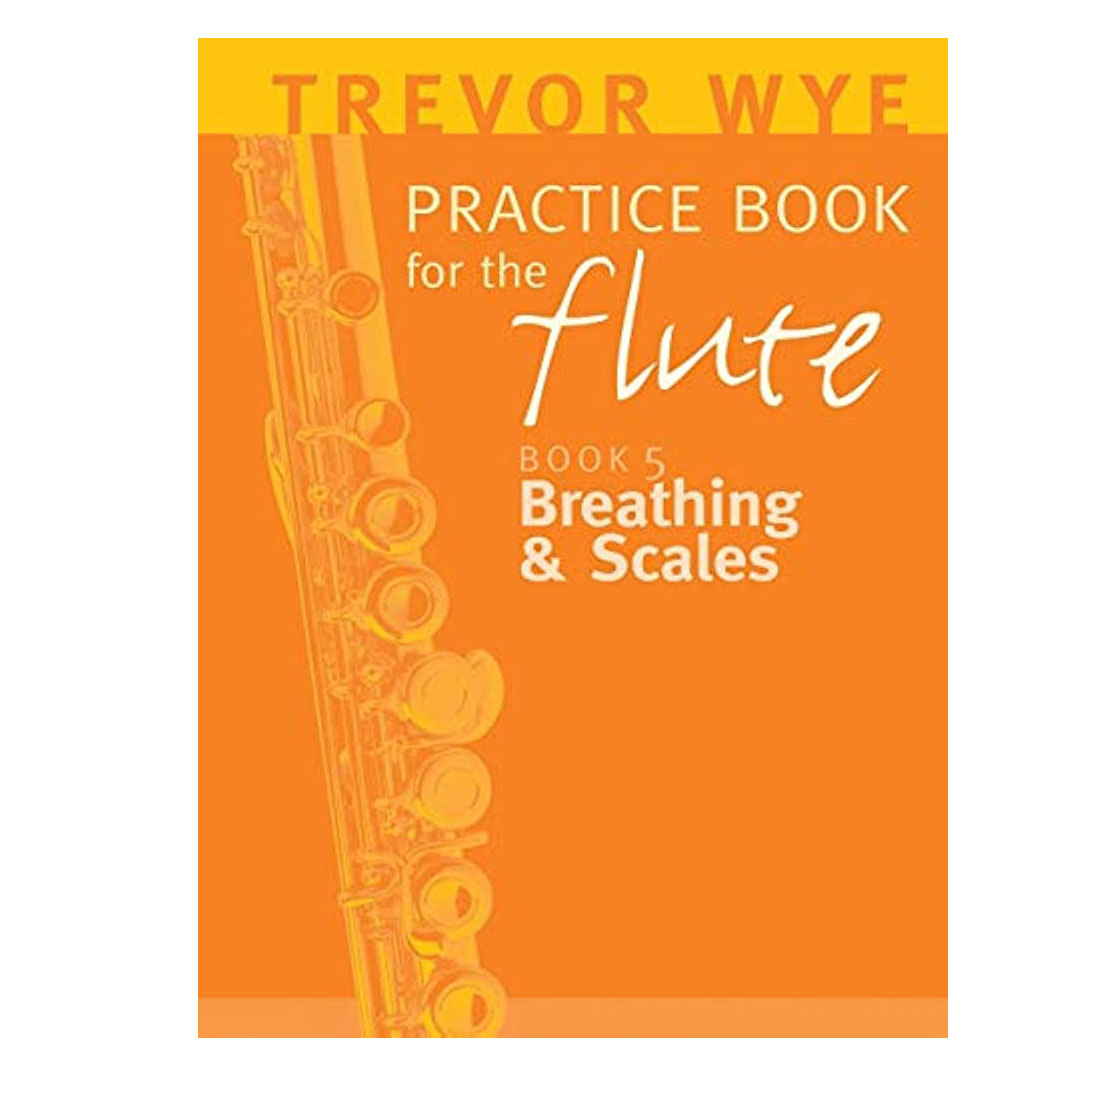 Trevor Wye - Practice Book for The Flute, Book 5 Breathing & Scales